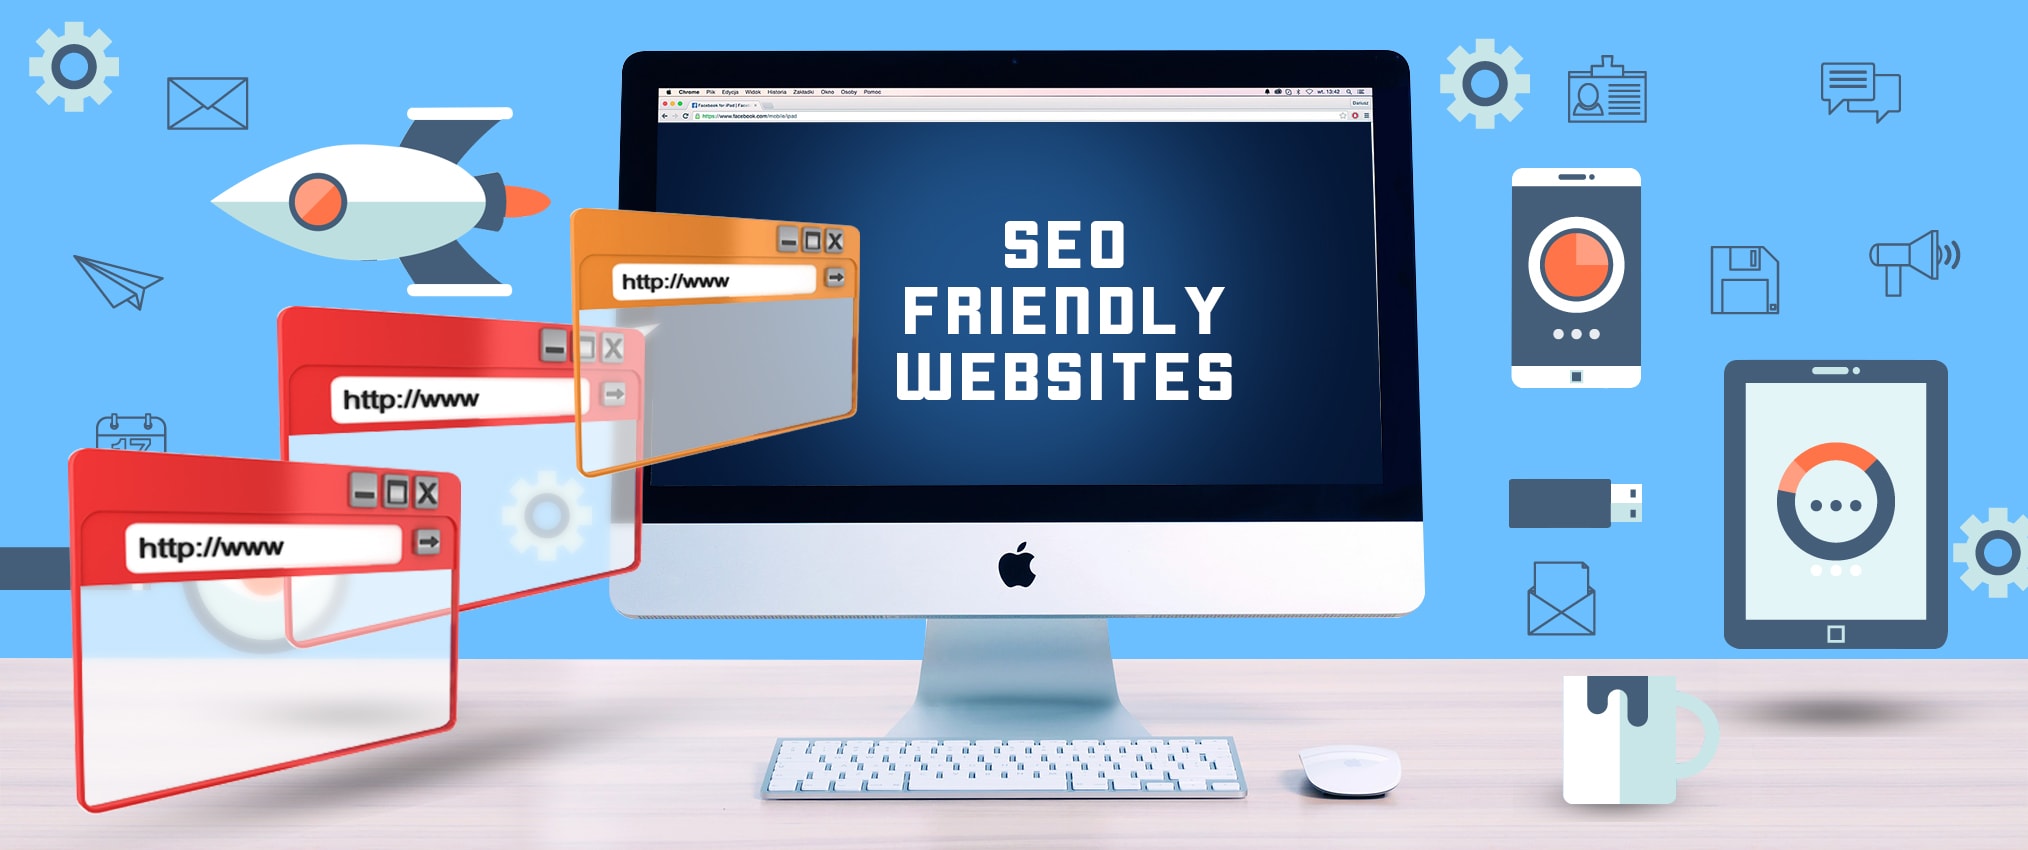 5-tips-for-creating-an-seo-friendly-websites